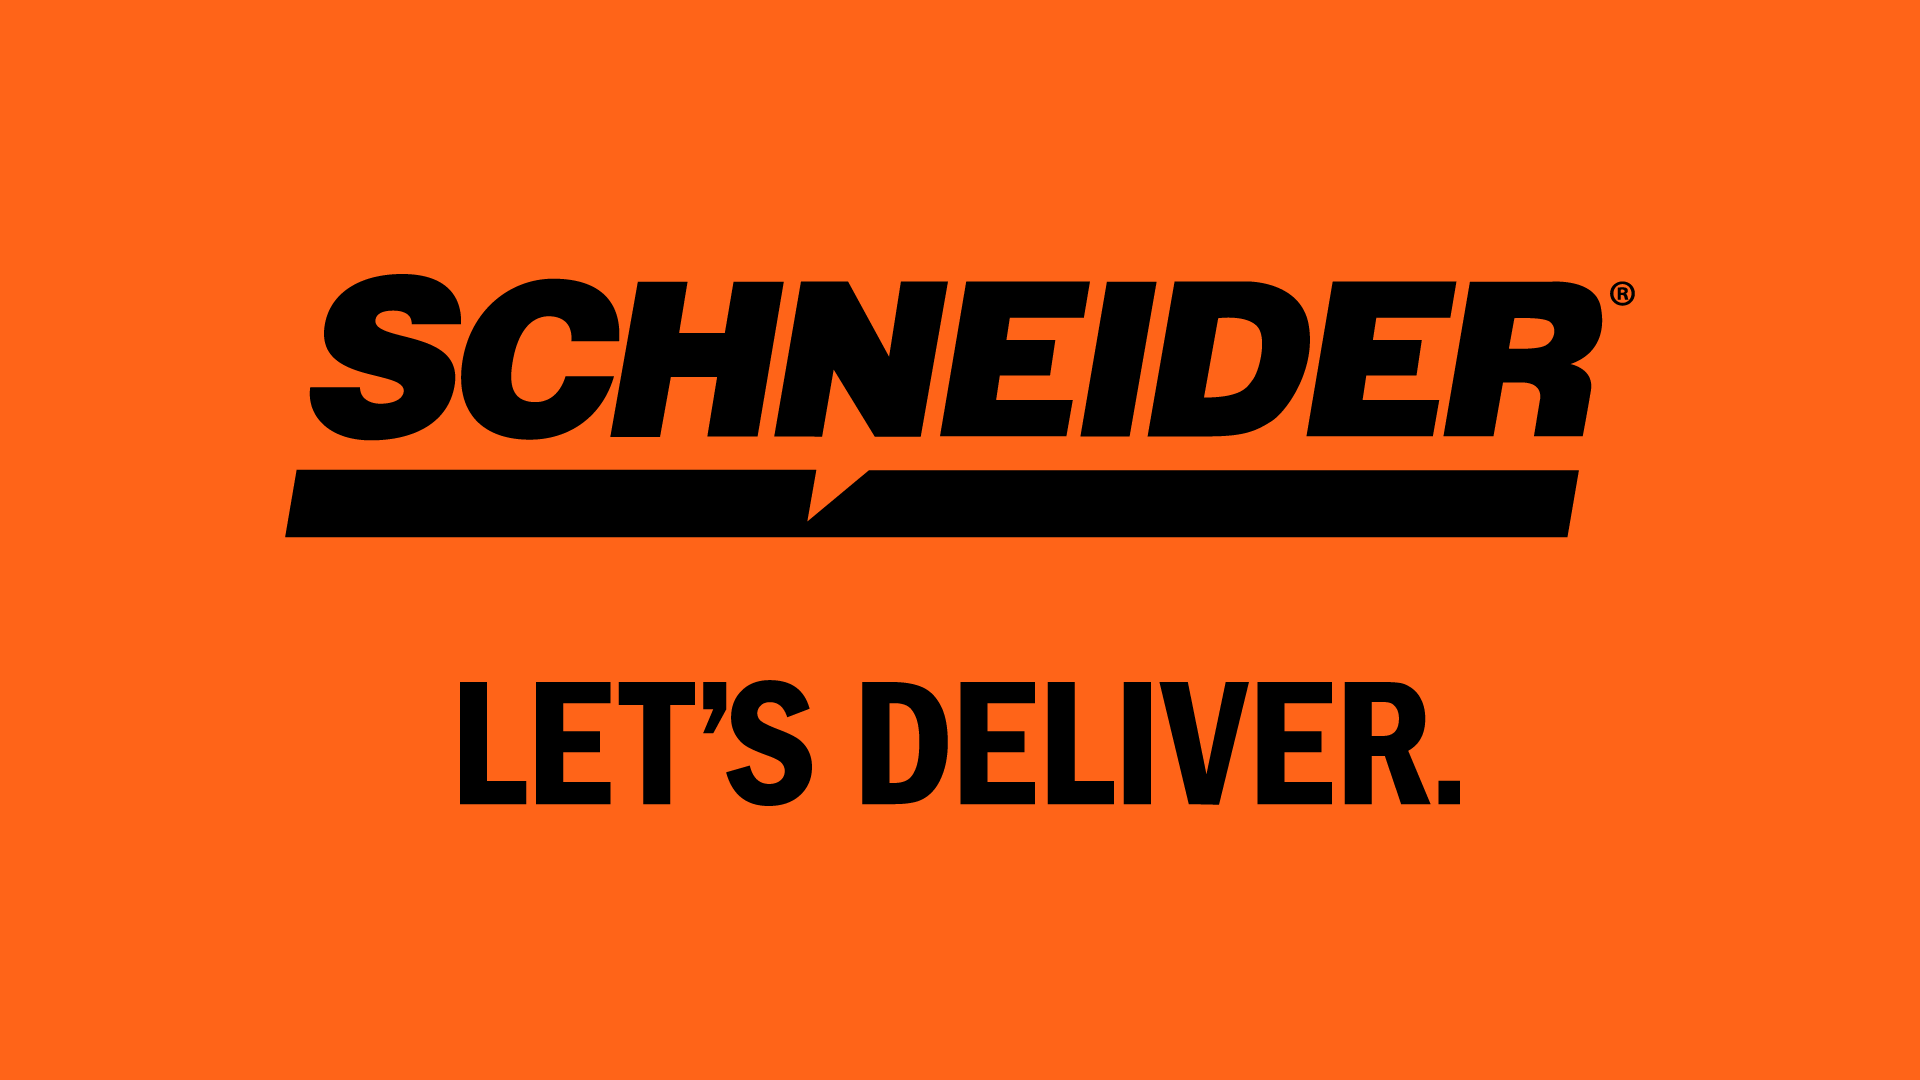 Schneider To Expand Usage Of Stay Metrics Service To Gain Insight For New Drivers